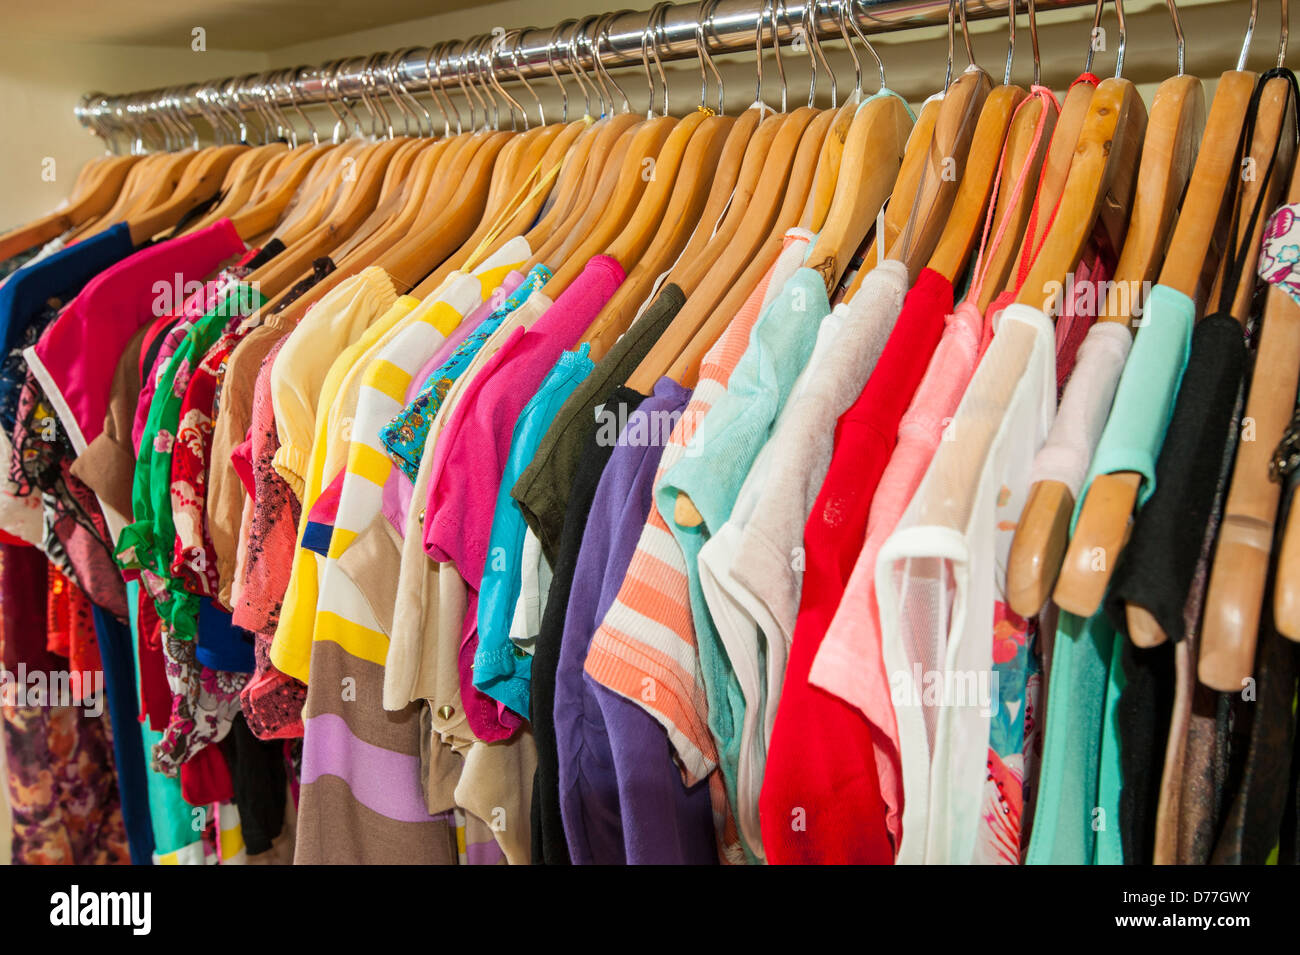 Various multi-colored items of clothing hanging on hangers and rail in ...